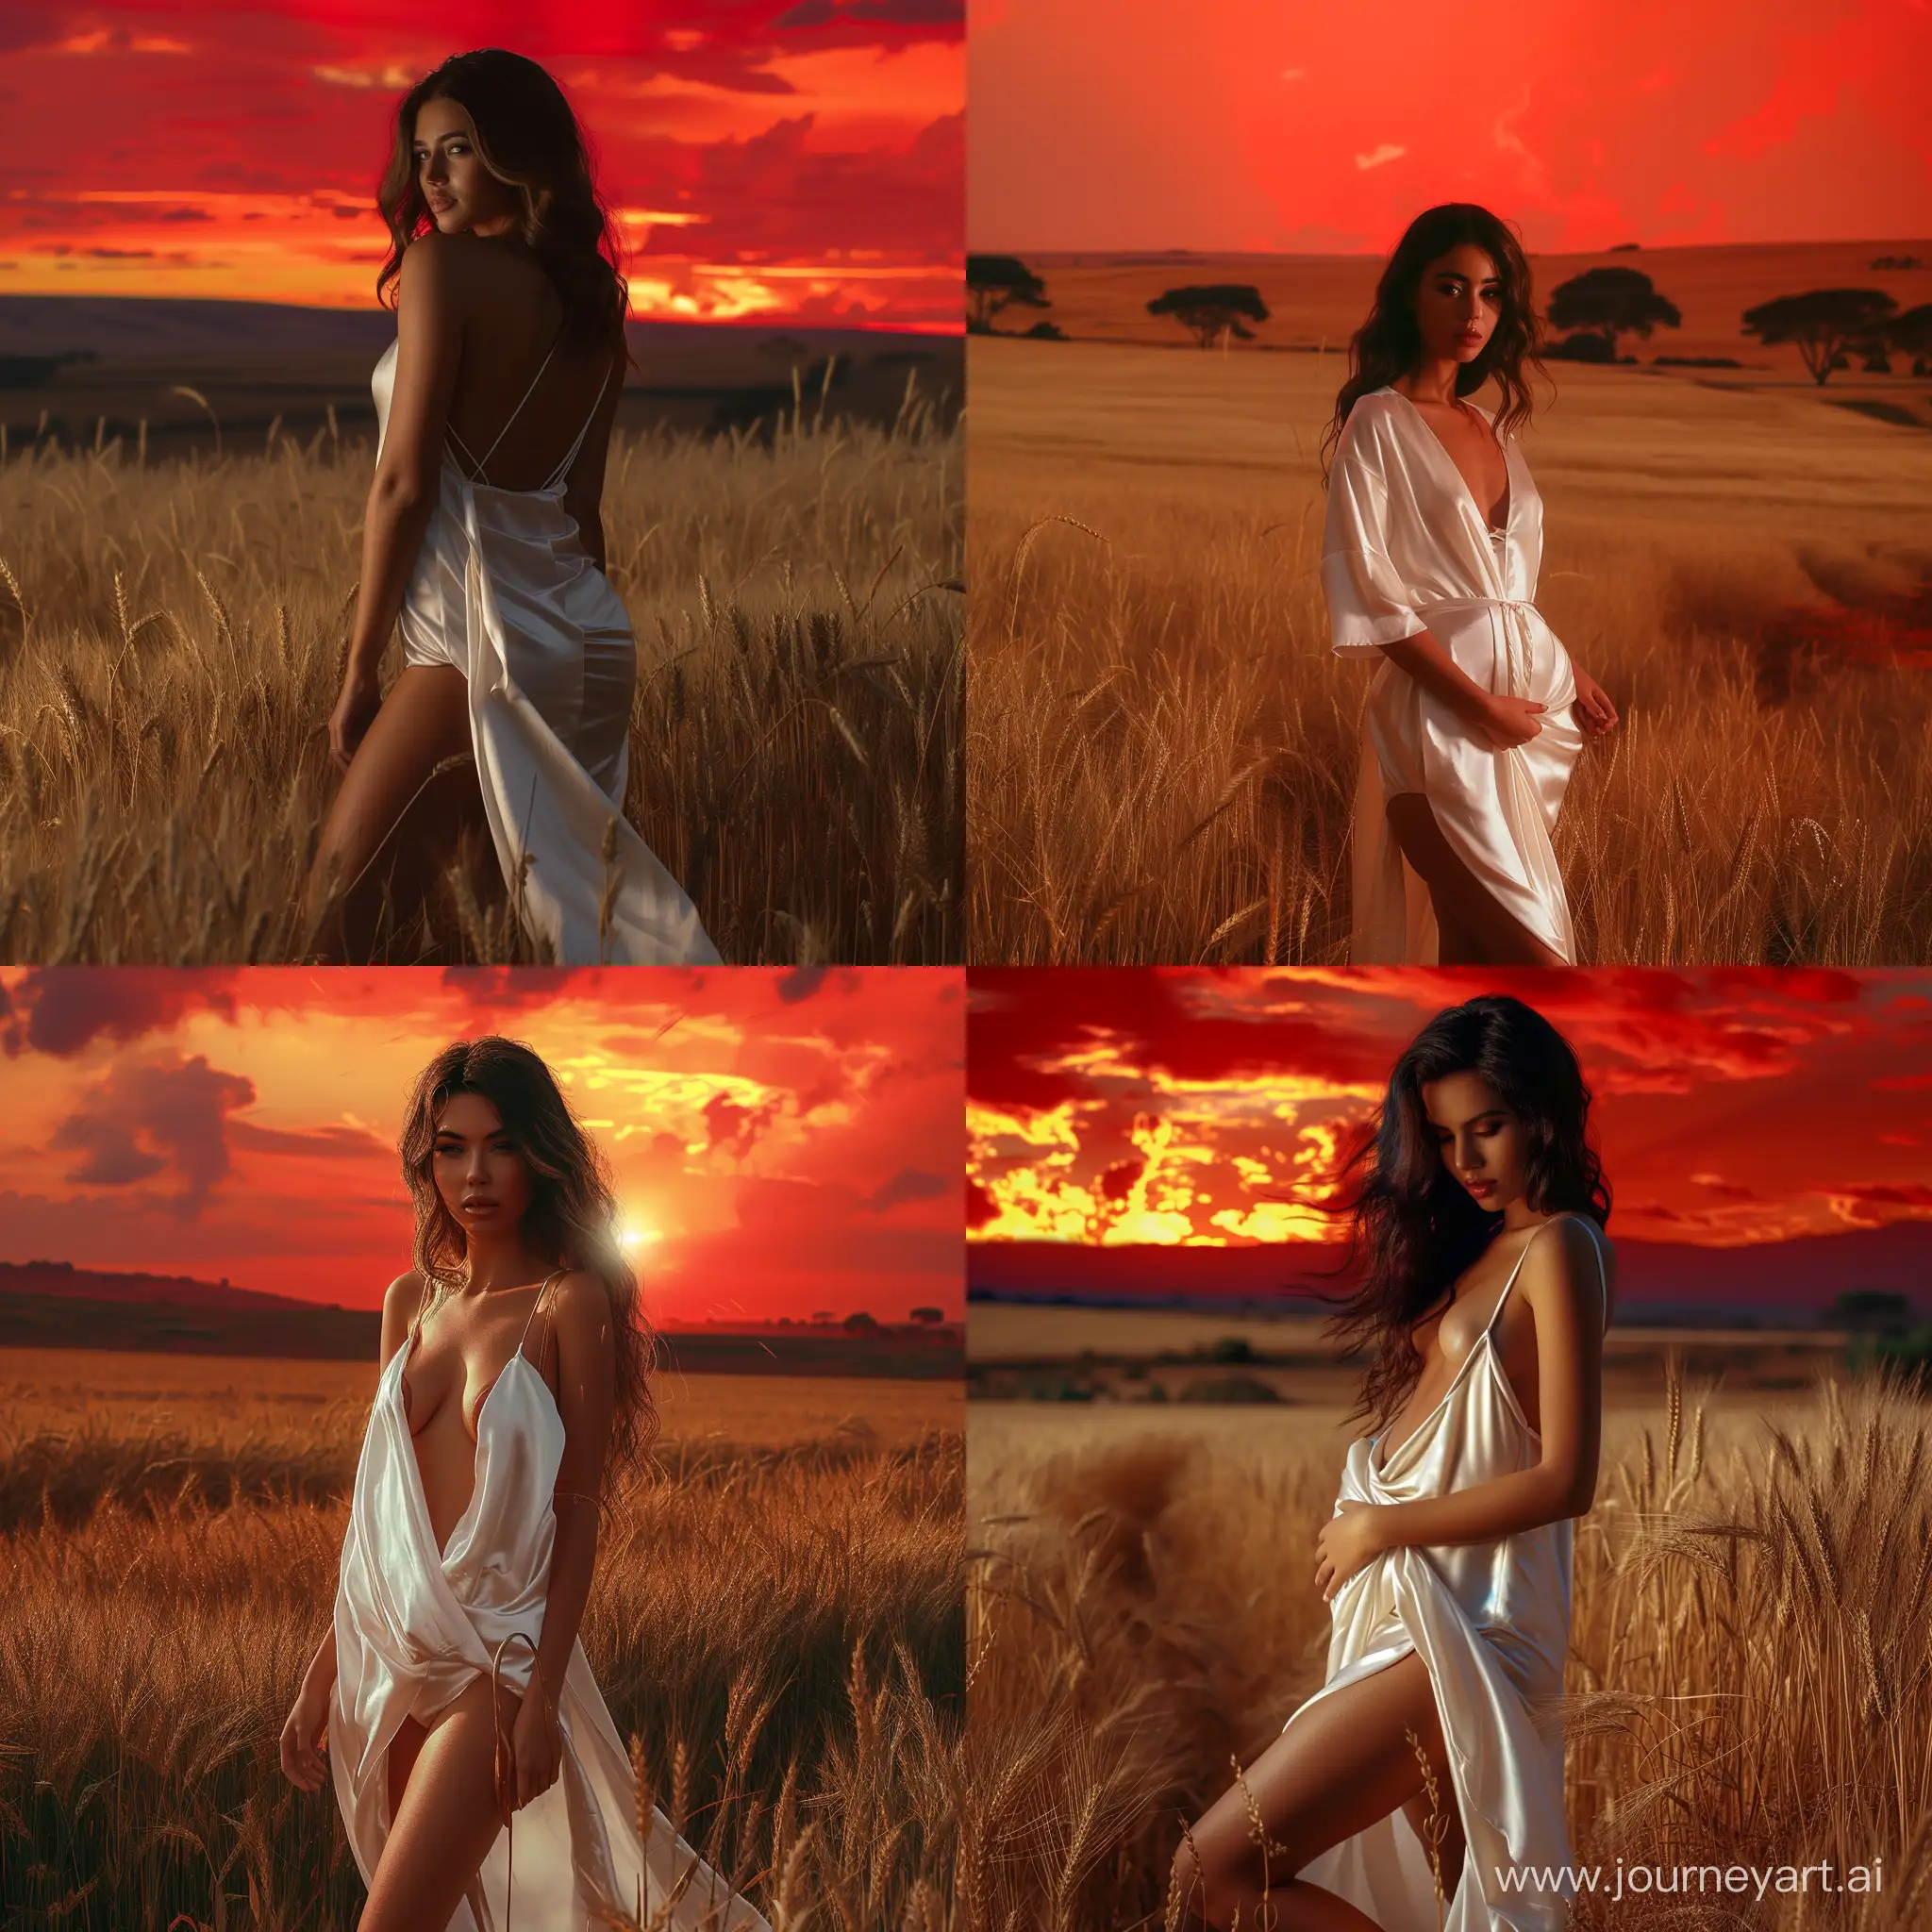 Enchanting-Brunette-Model-in-White-Silk-Nightgown-Amidst-African-Wheat-Field-at-Sunset